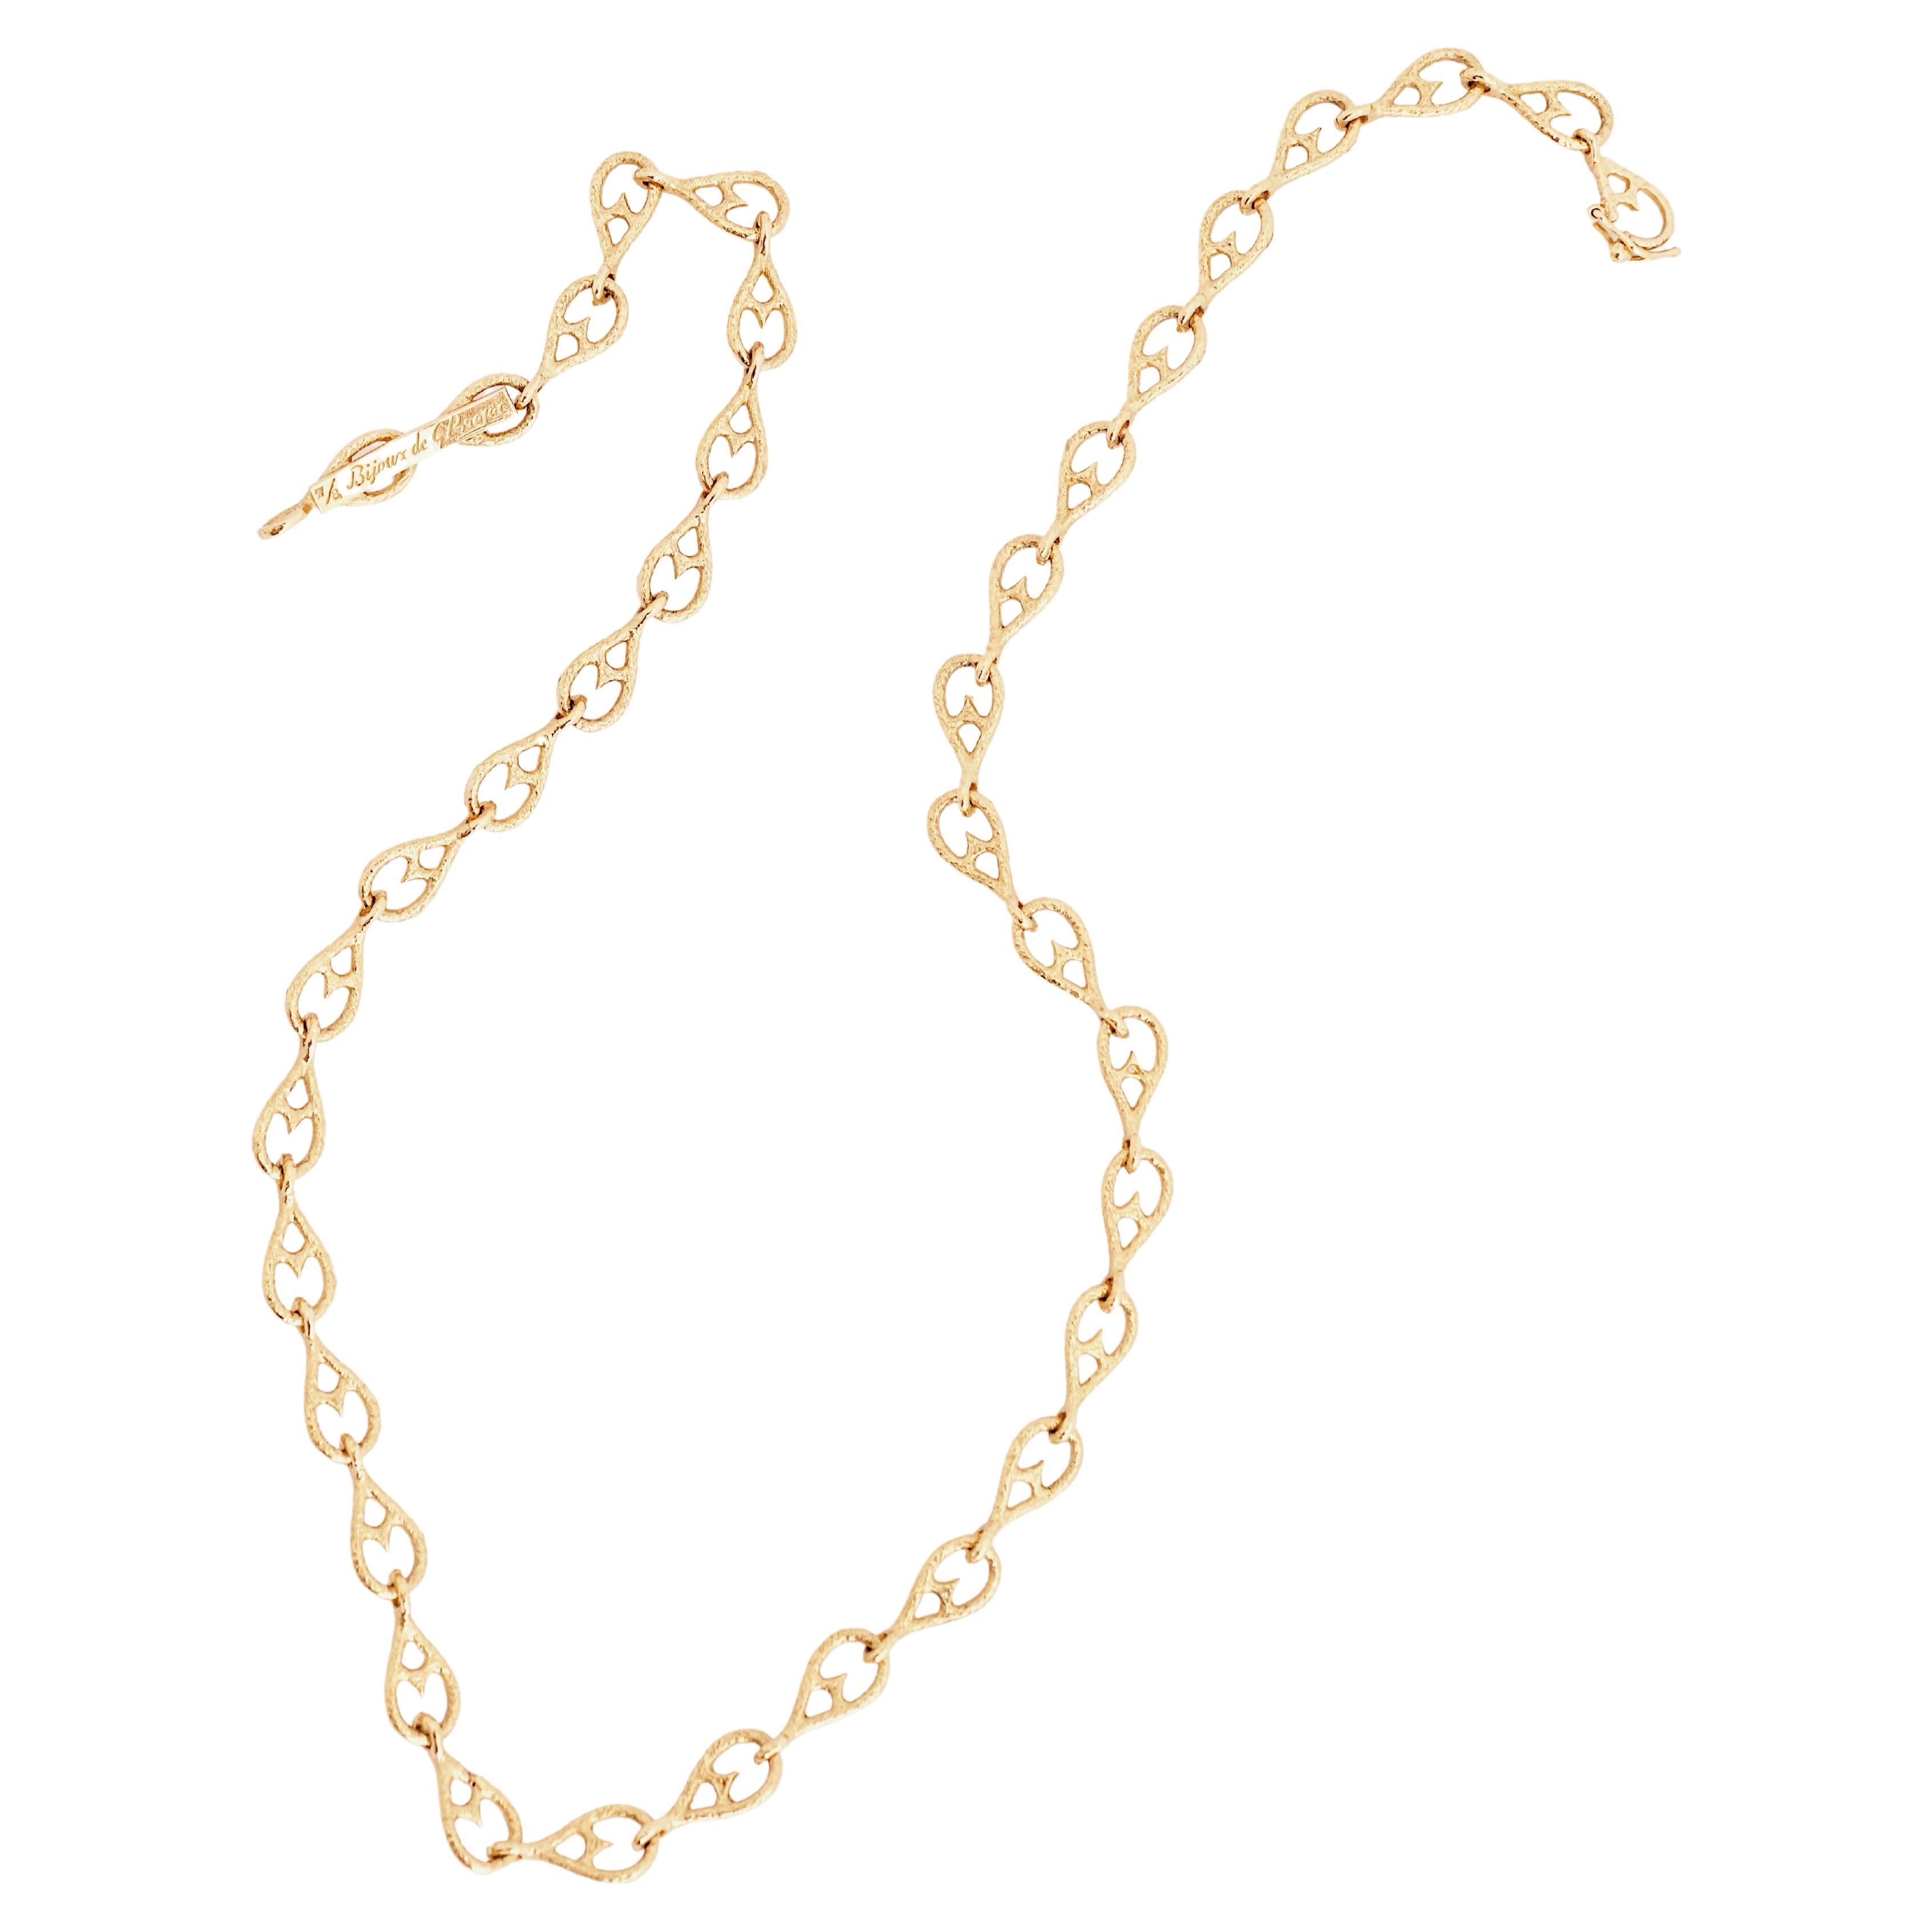 1963 Georges Braque 18k Gold "Merope" Necklace For Sale